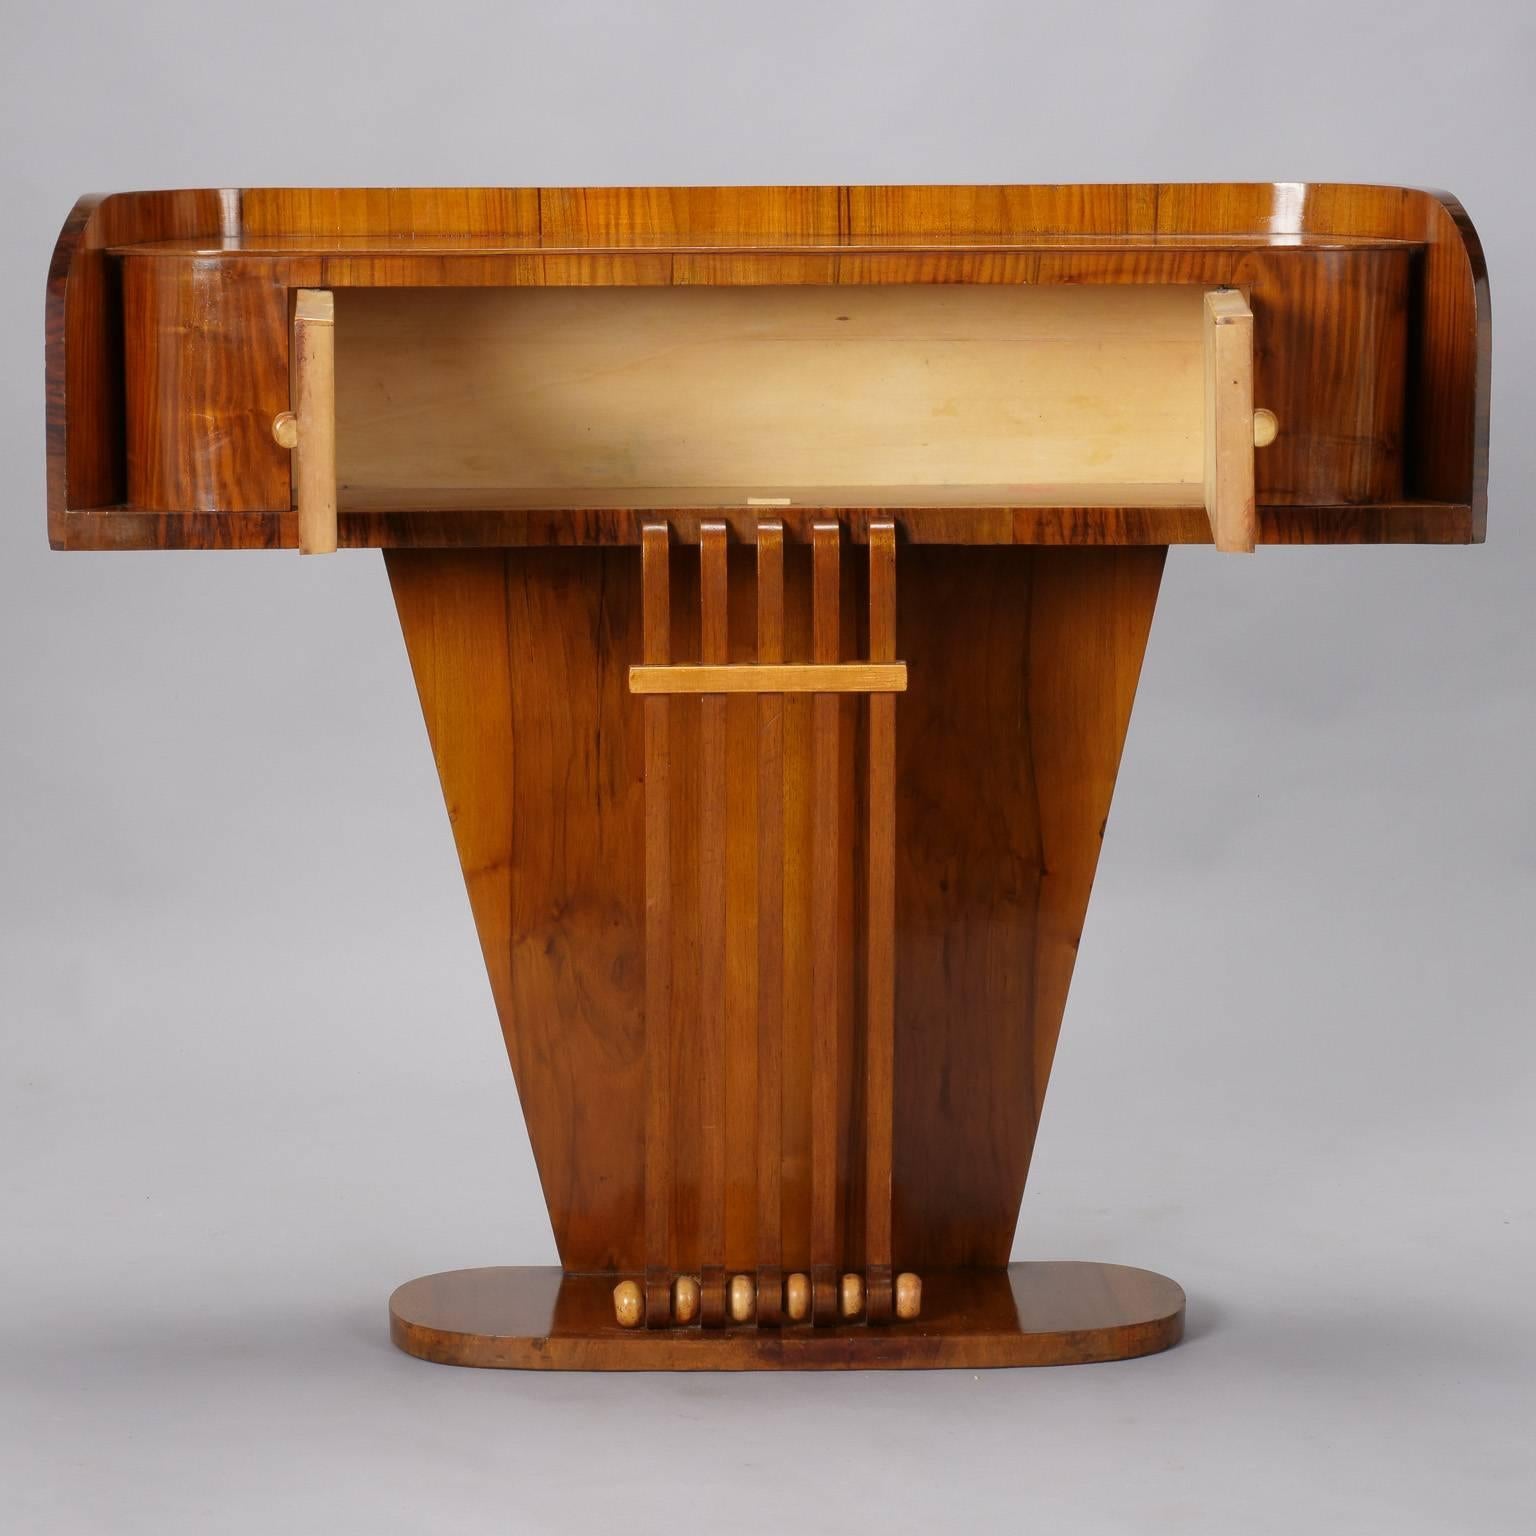 Italian Art Deco console with contrasting wood, circa 1930s. Polished burl wood with two hinged contrasting blond wood door cabinets and pedestal base. Unknown maker.